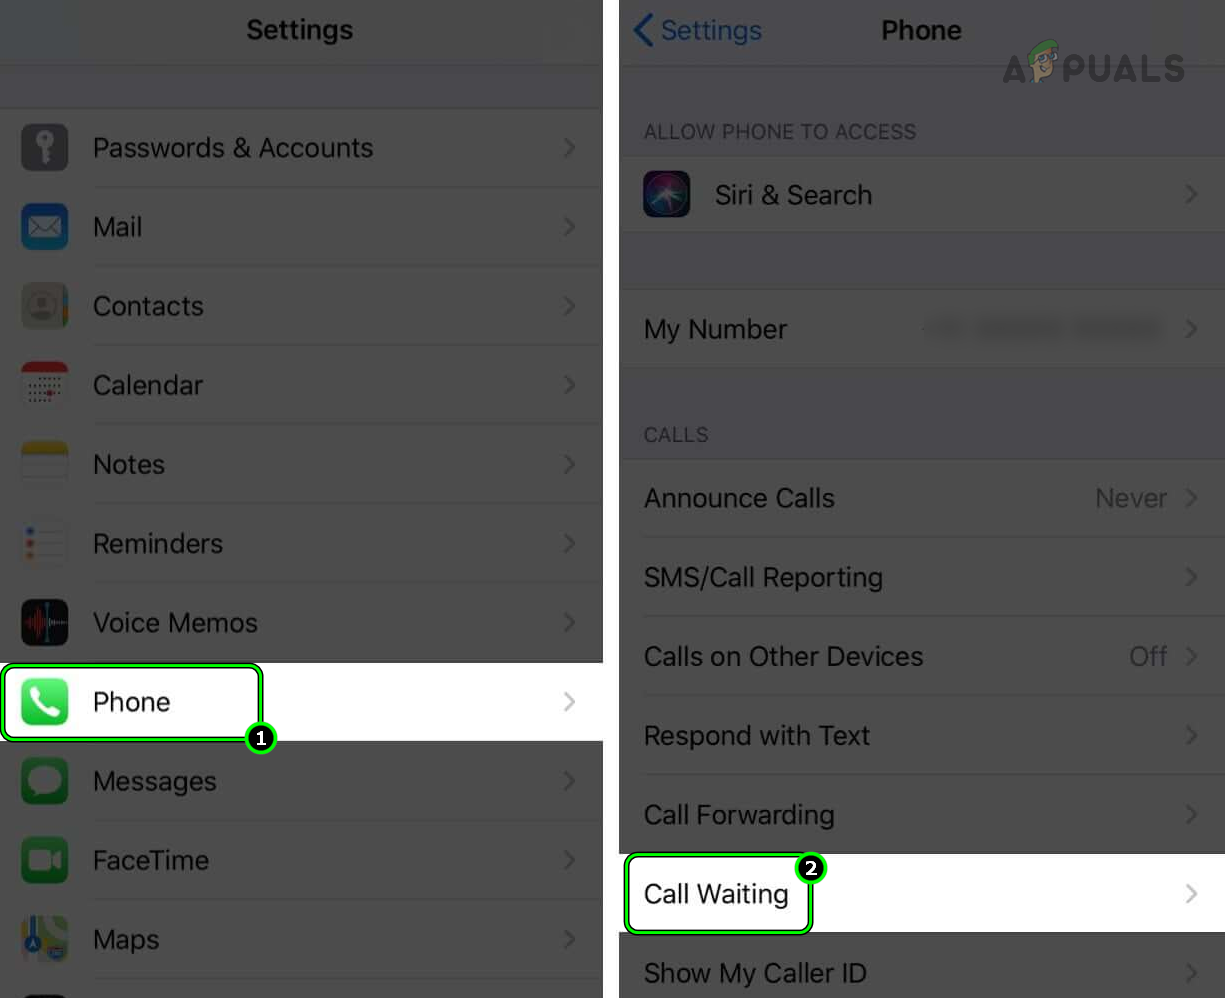 Open Call Waiting in the iPhone's Settings